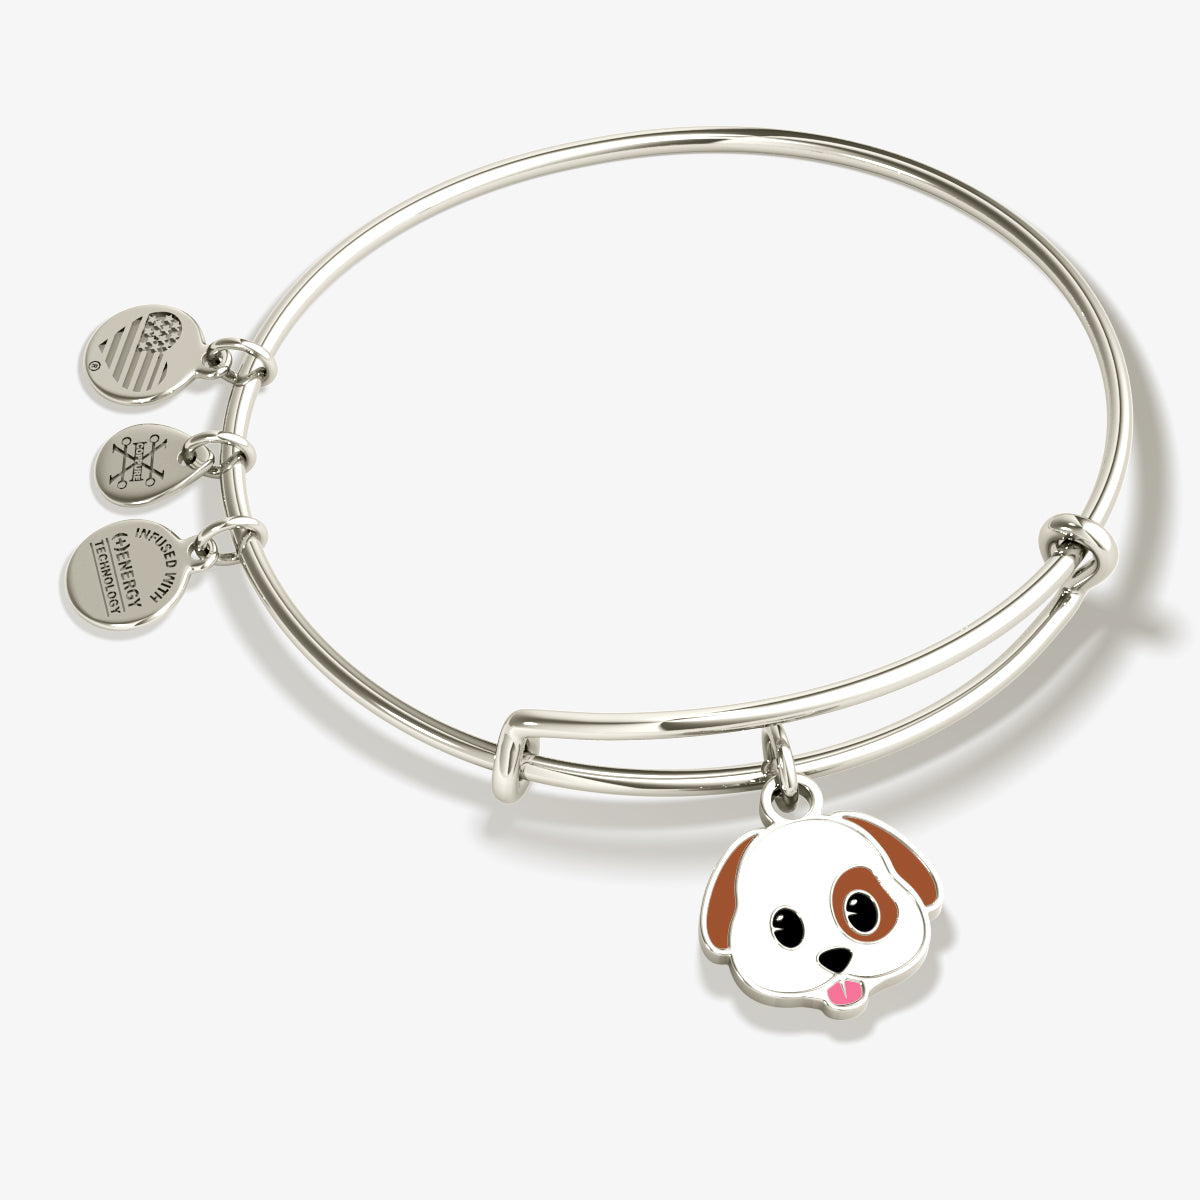 Charm Dog Paw Bracelet Silver Pet Bead Stainless Steel Metal Rainbow Link Chain 